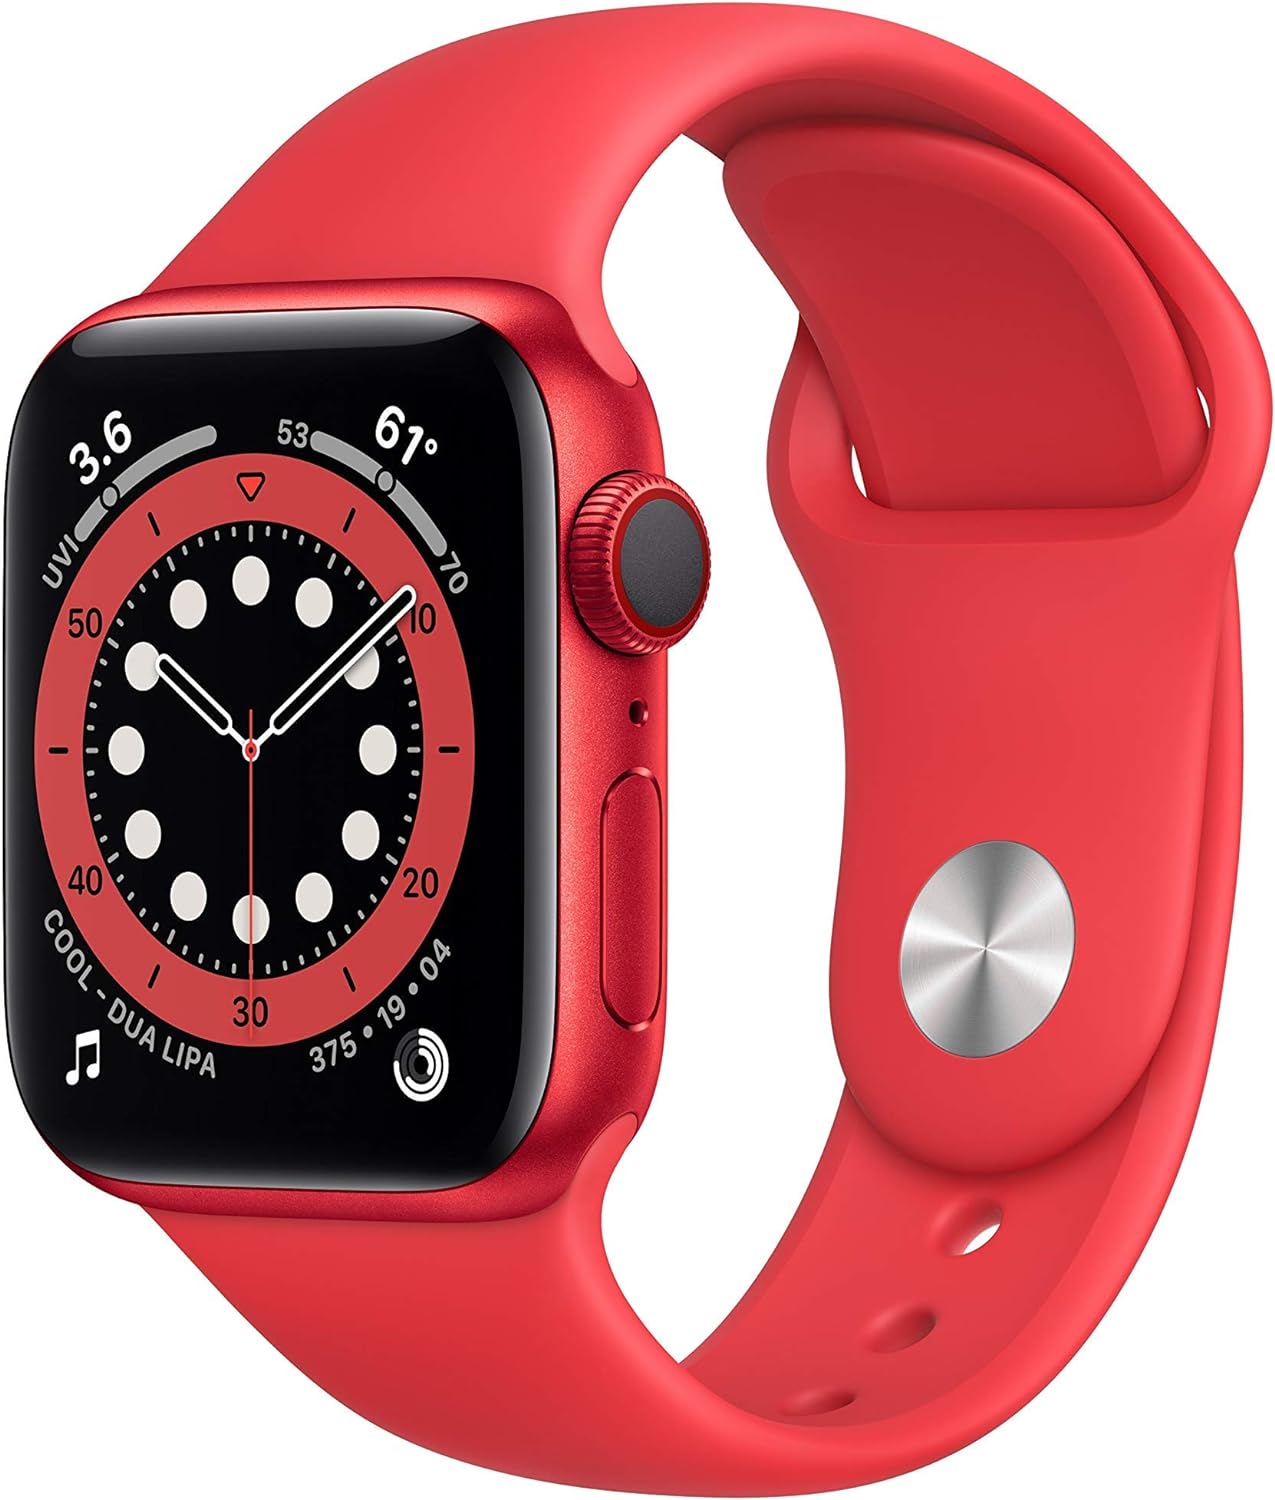 Apple Watch Series 6 Review: Stay Connected and Fit